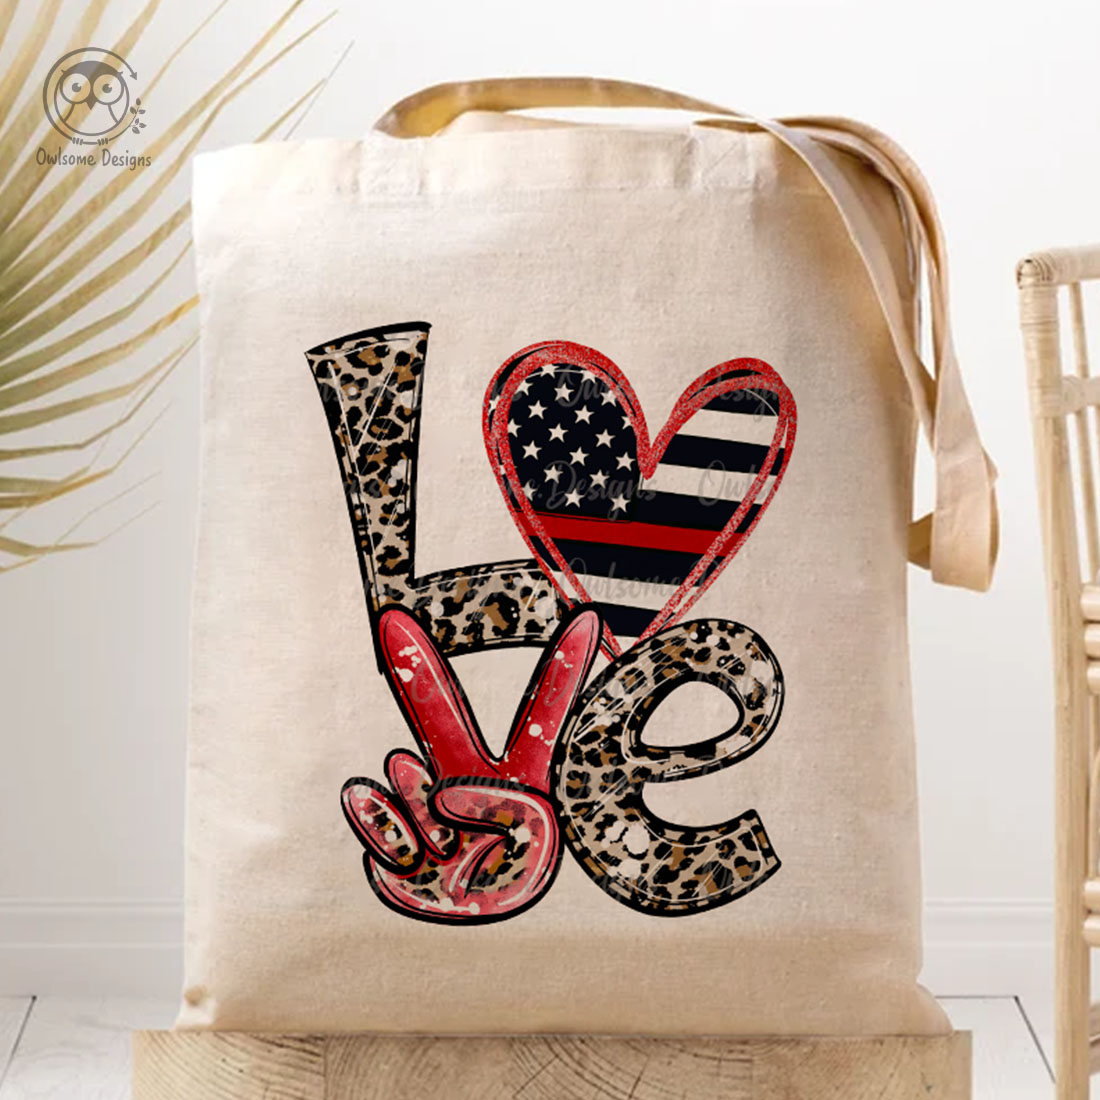 Image of a bag with a charming inscription love with the American flag.